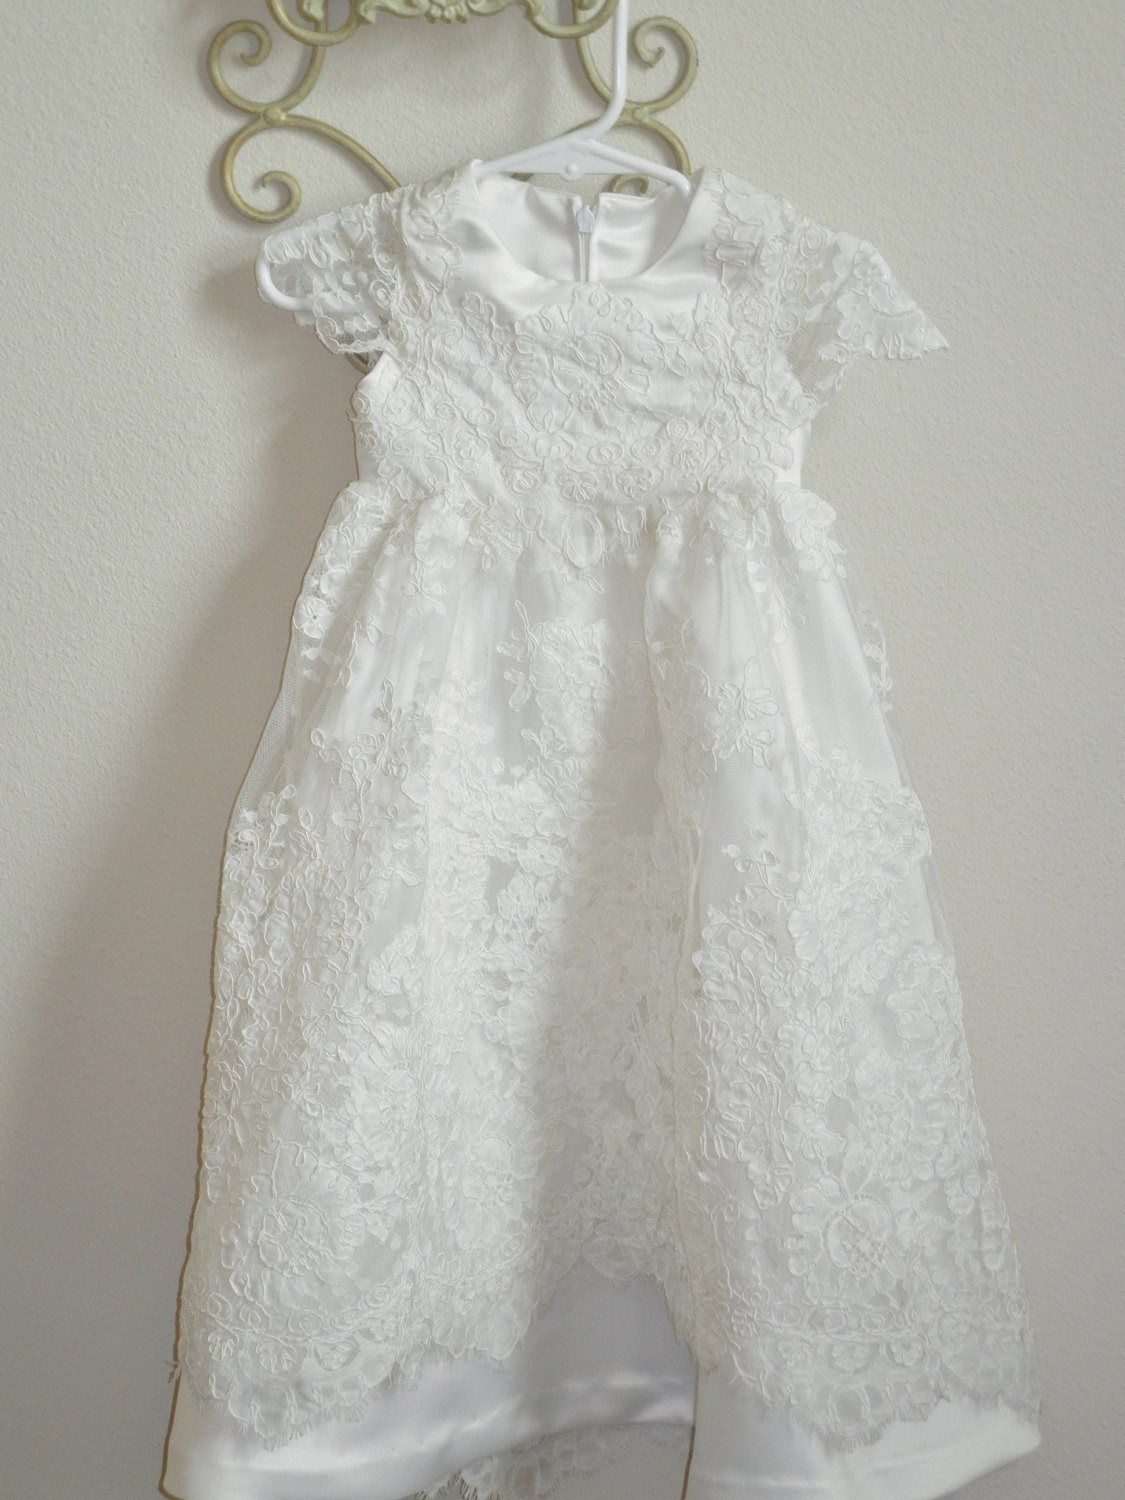 Christening Gown From Wedding Dress
 Christening Gown Baptism Gown made from your Wedding dress